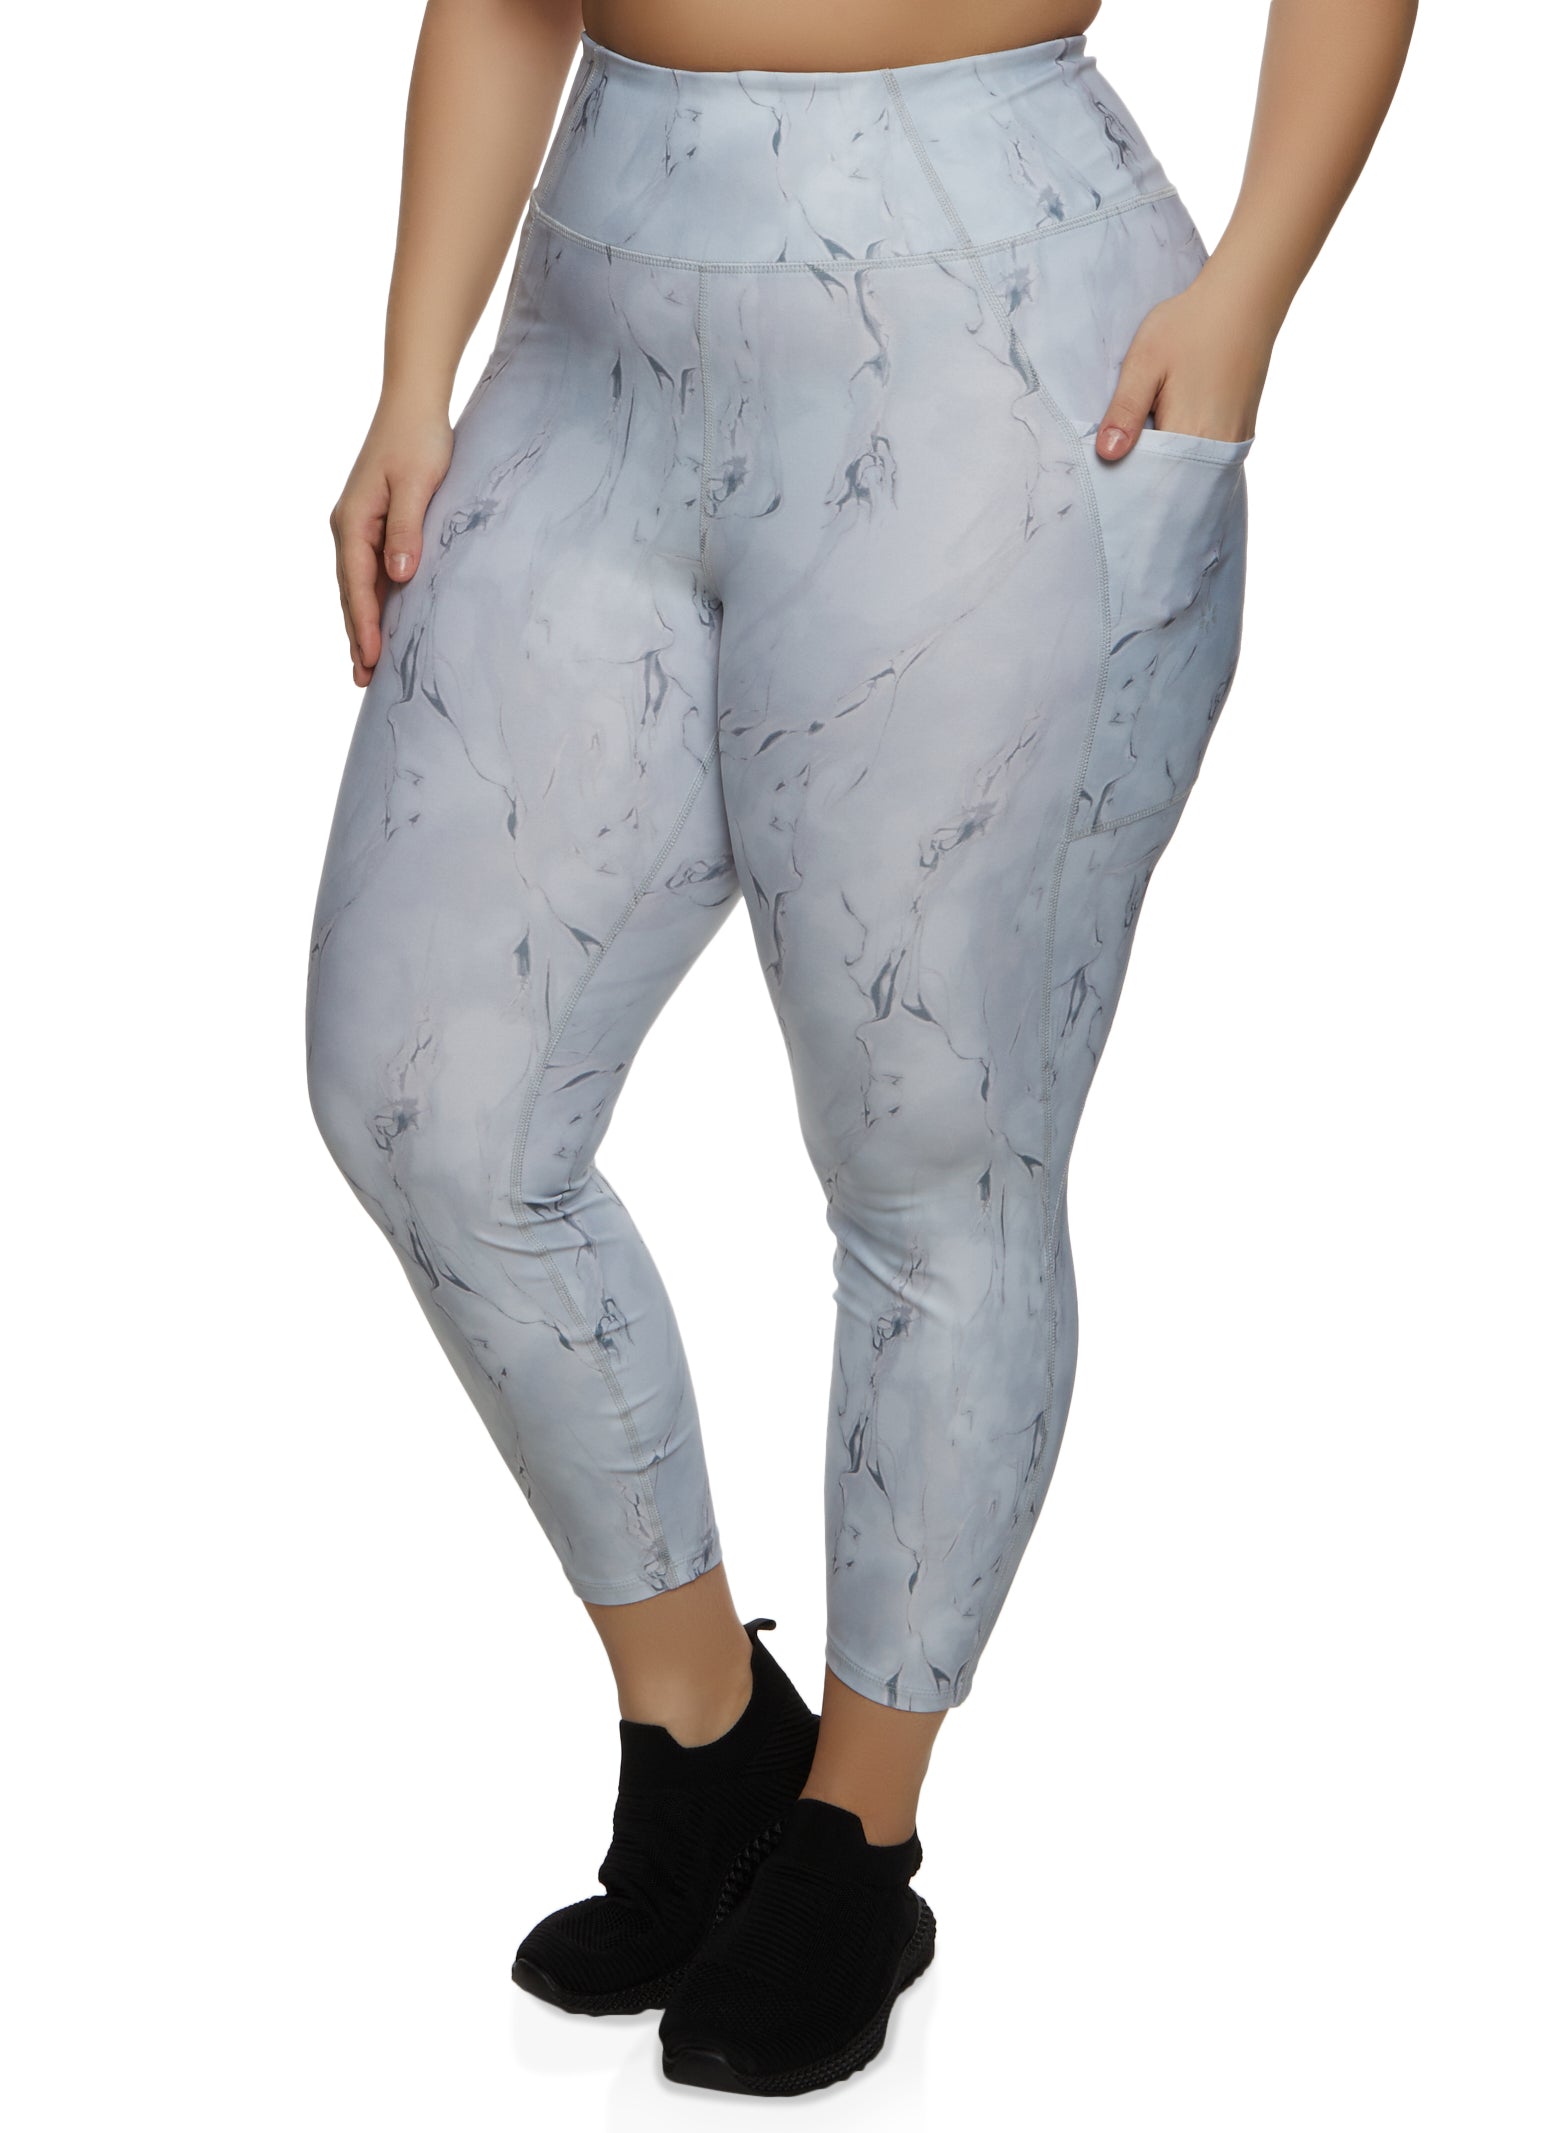 Plus Size Printed Leggings, Everyday Low Prices